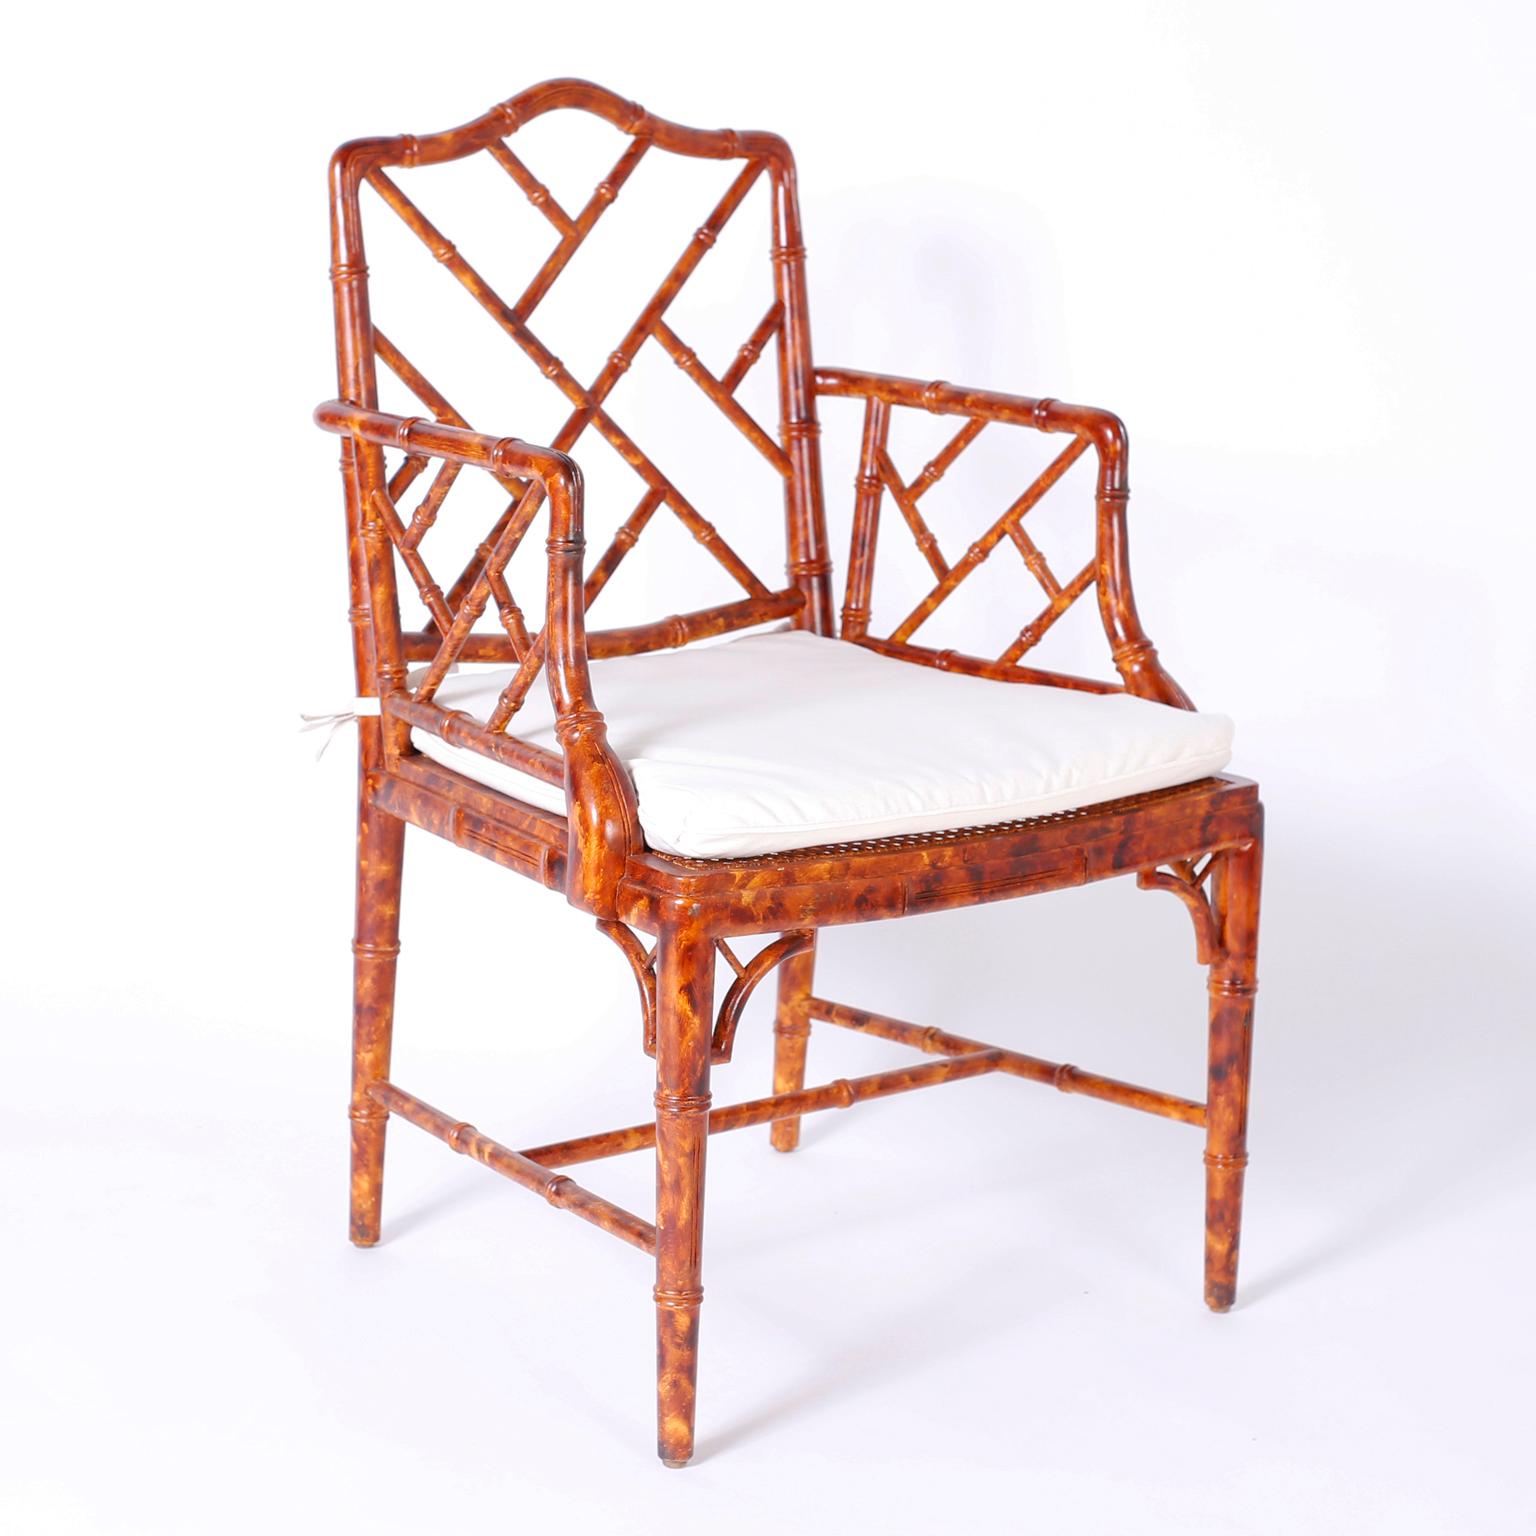 Set of four vintage carved wood dining chairs with a Classic faux bamboo Chinese Chippendale form, dramatic faux tortoise finish, and tie back cushions over caned seats.